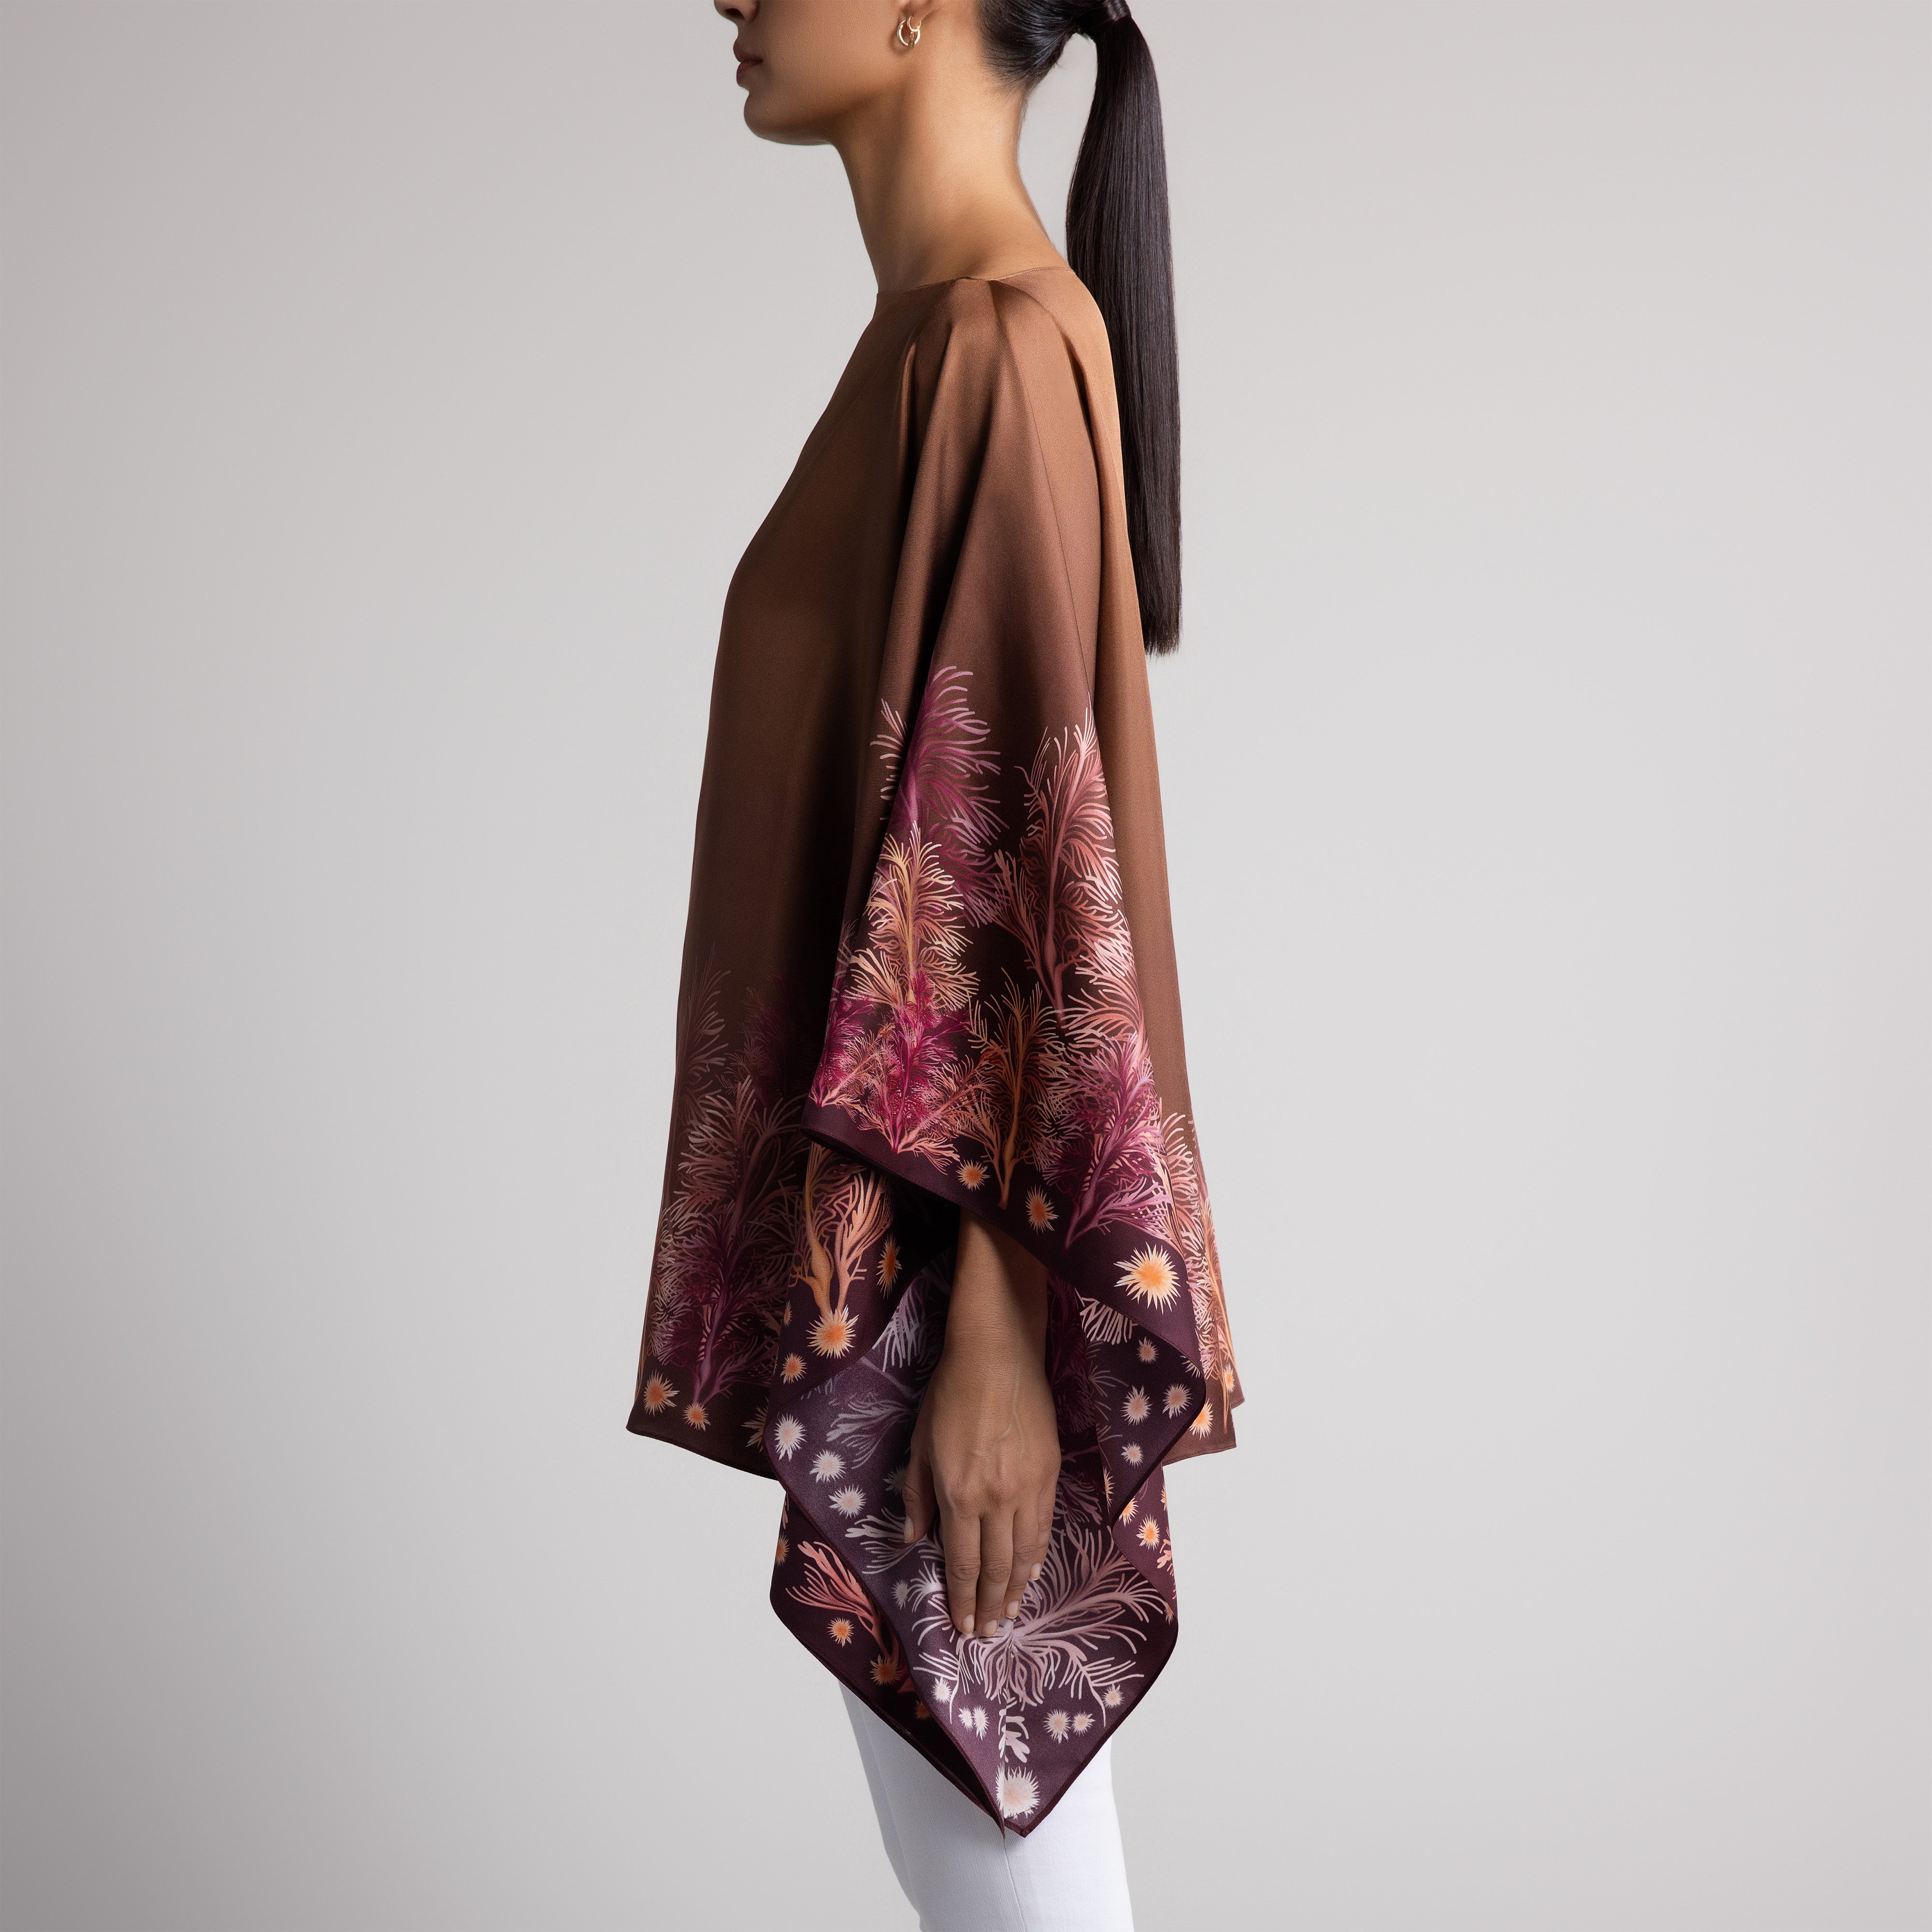 Galapagos Silk Poncho in Brown Ombré